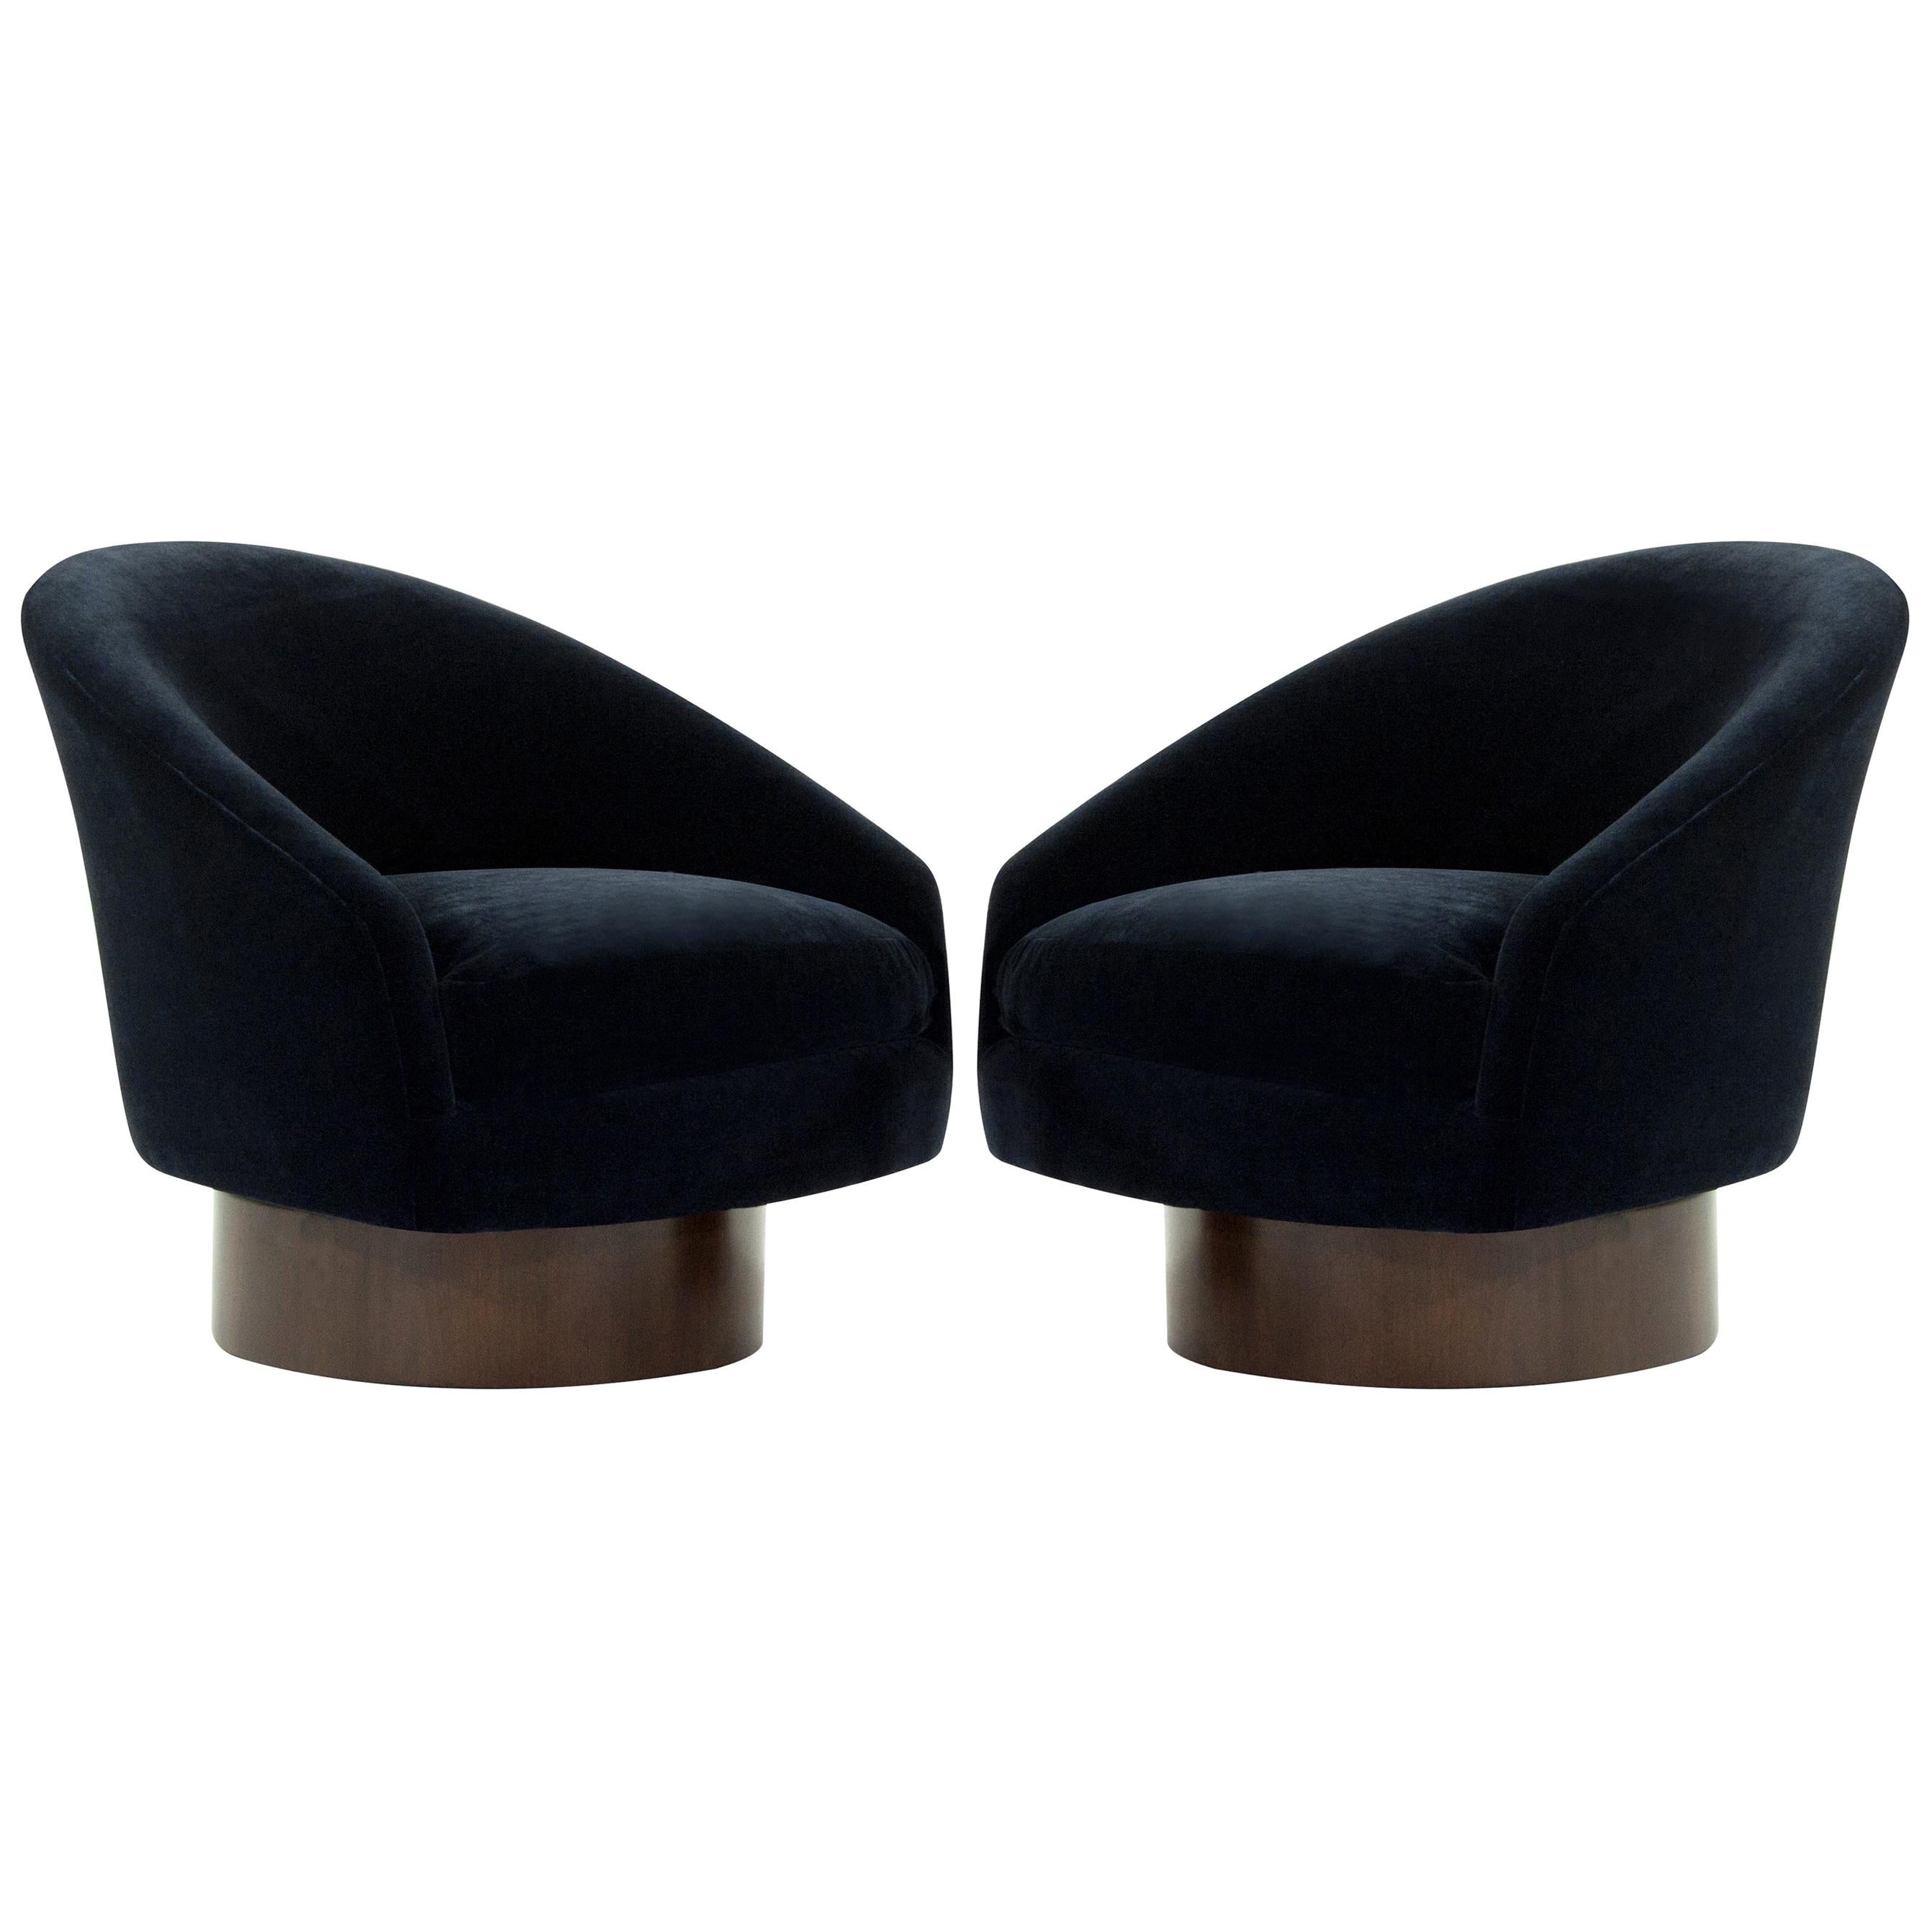 Adrian Pearsall for Craft Associates Swivel Chairs in Deep Blue Mohair